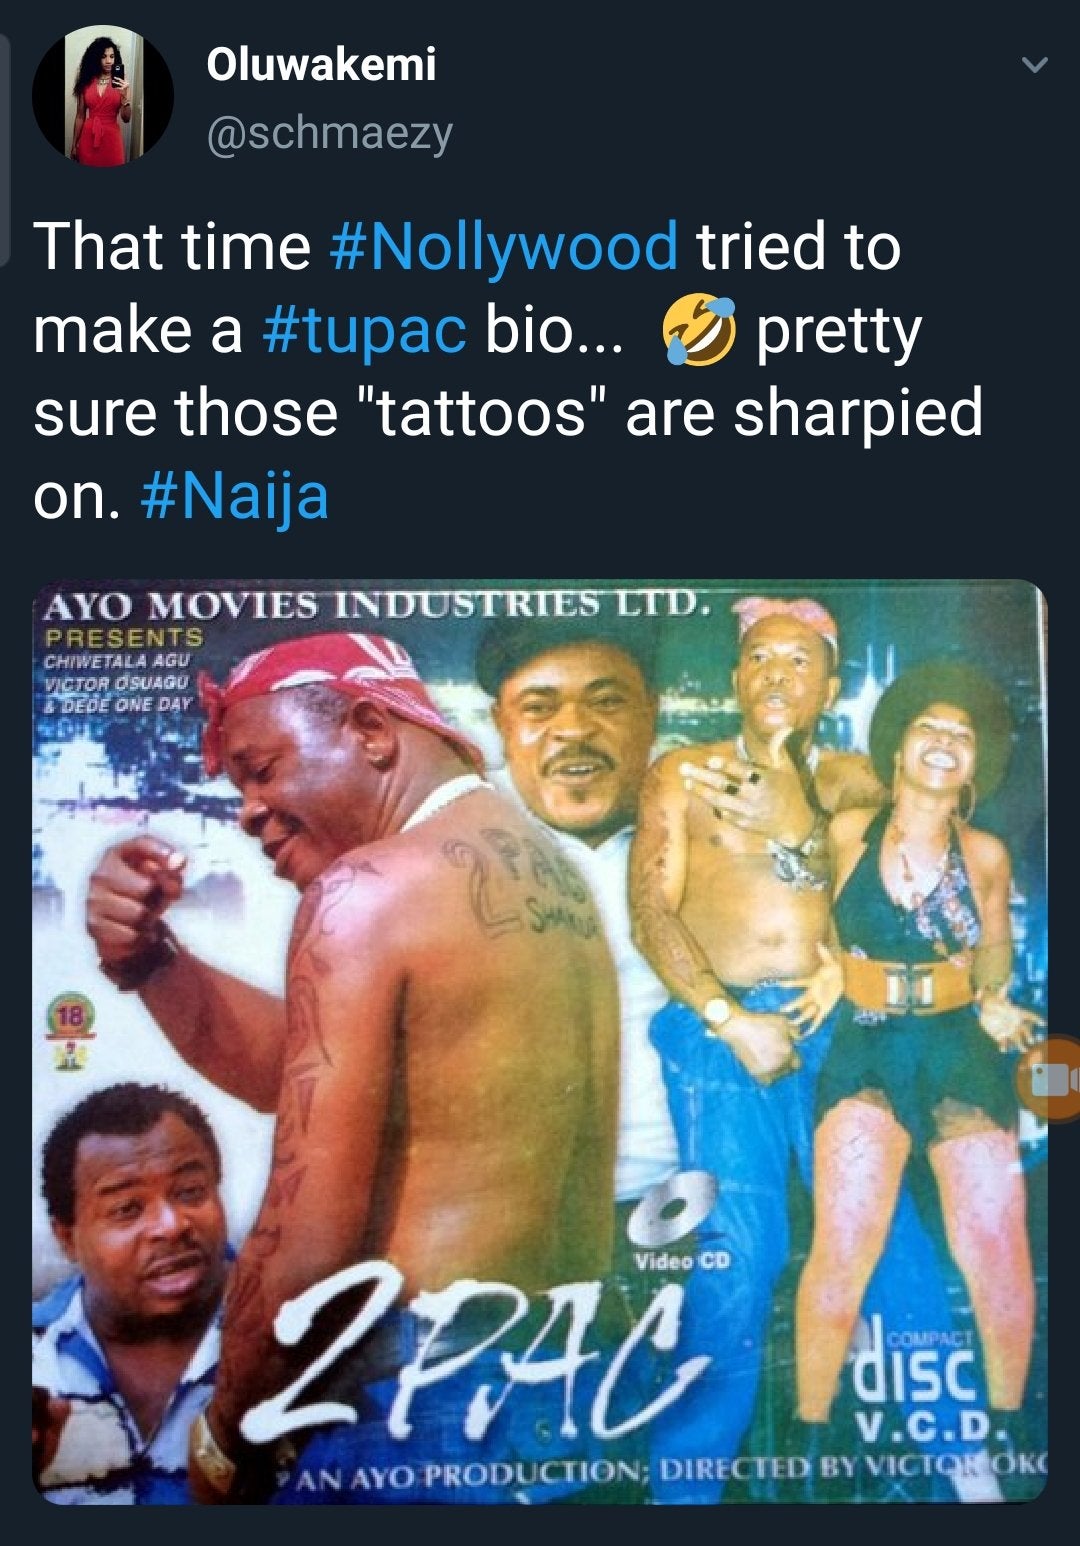 movies - Oluwakemi That time tried to make a bio... pretty sure those "tattoos" are sharpied on. Ayo Movies Industries Ltd. Presents Chiwetala Agu Victor Osuagu Dede One Day Video Cd Coupage Zpac Disc V.C.D. An Ayo Production; Directed By Victor Oke